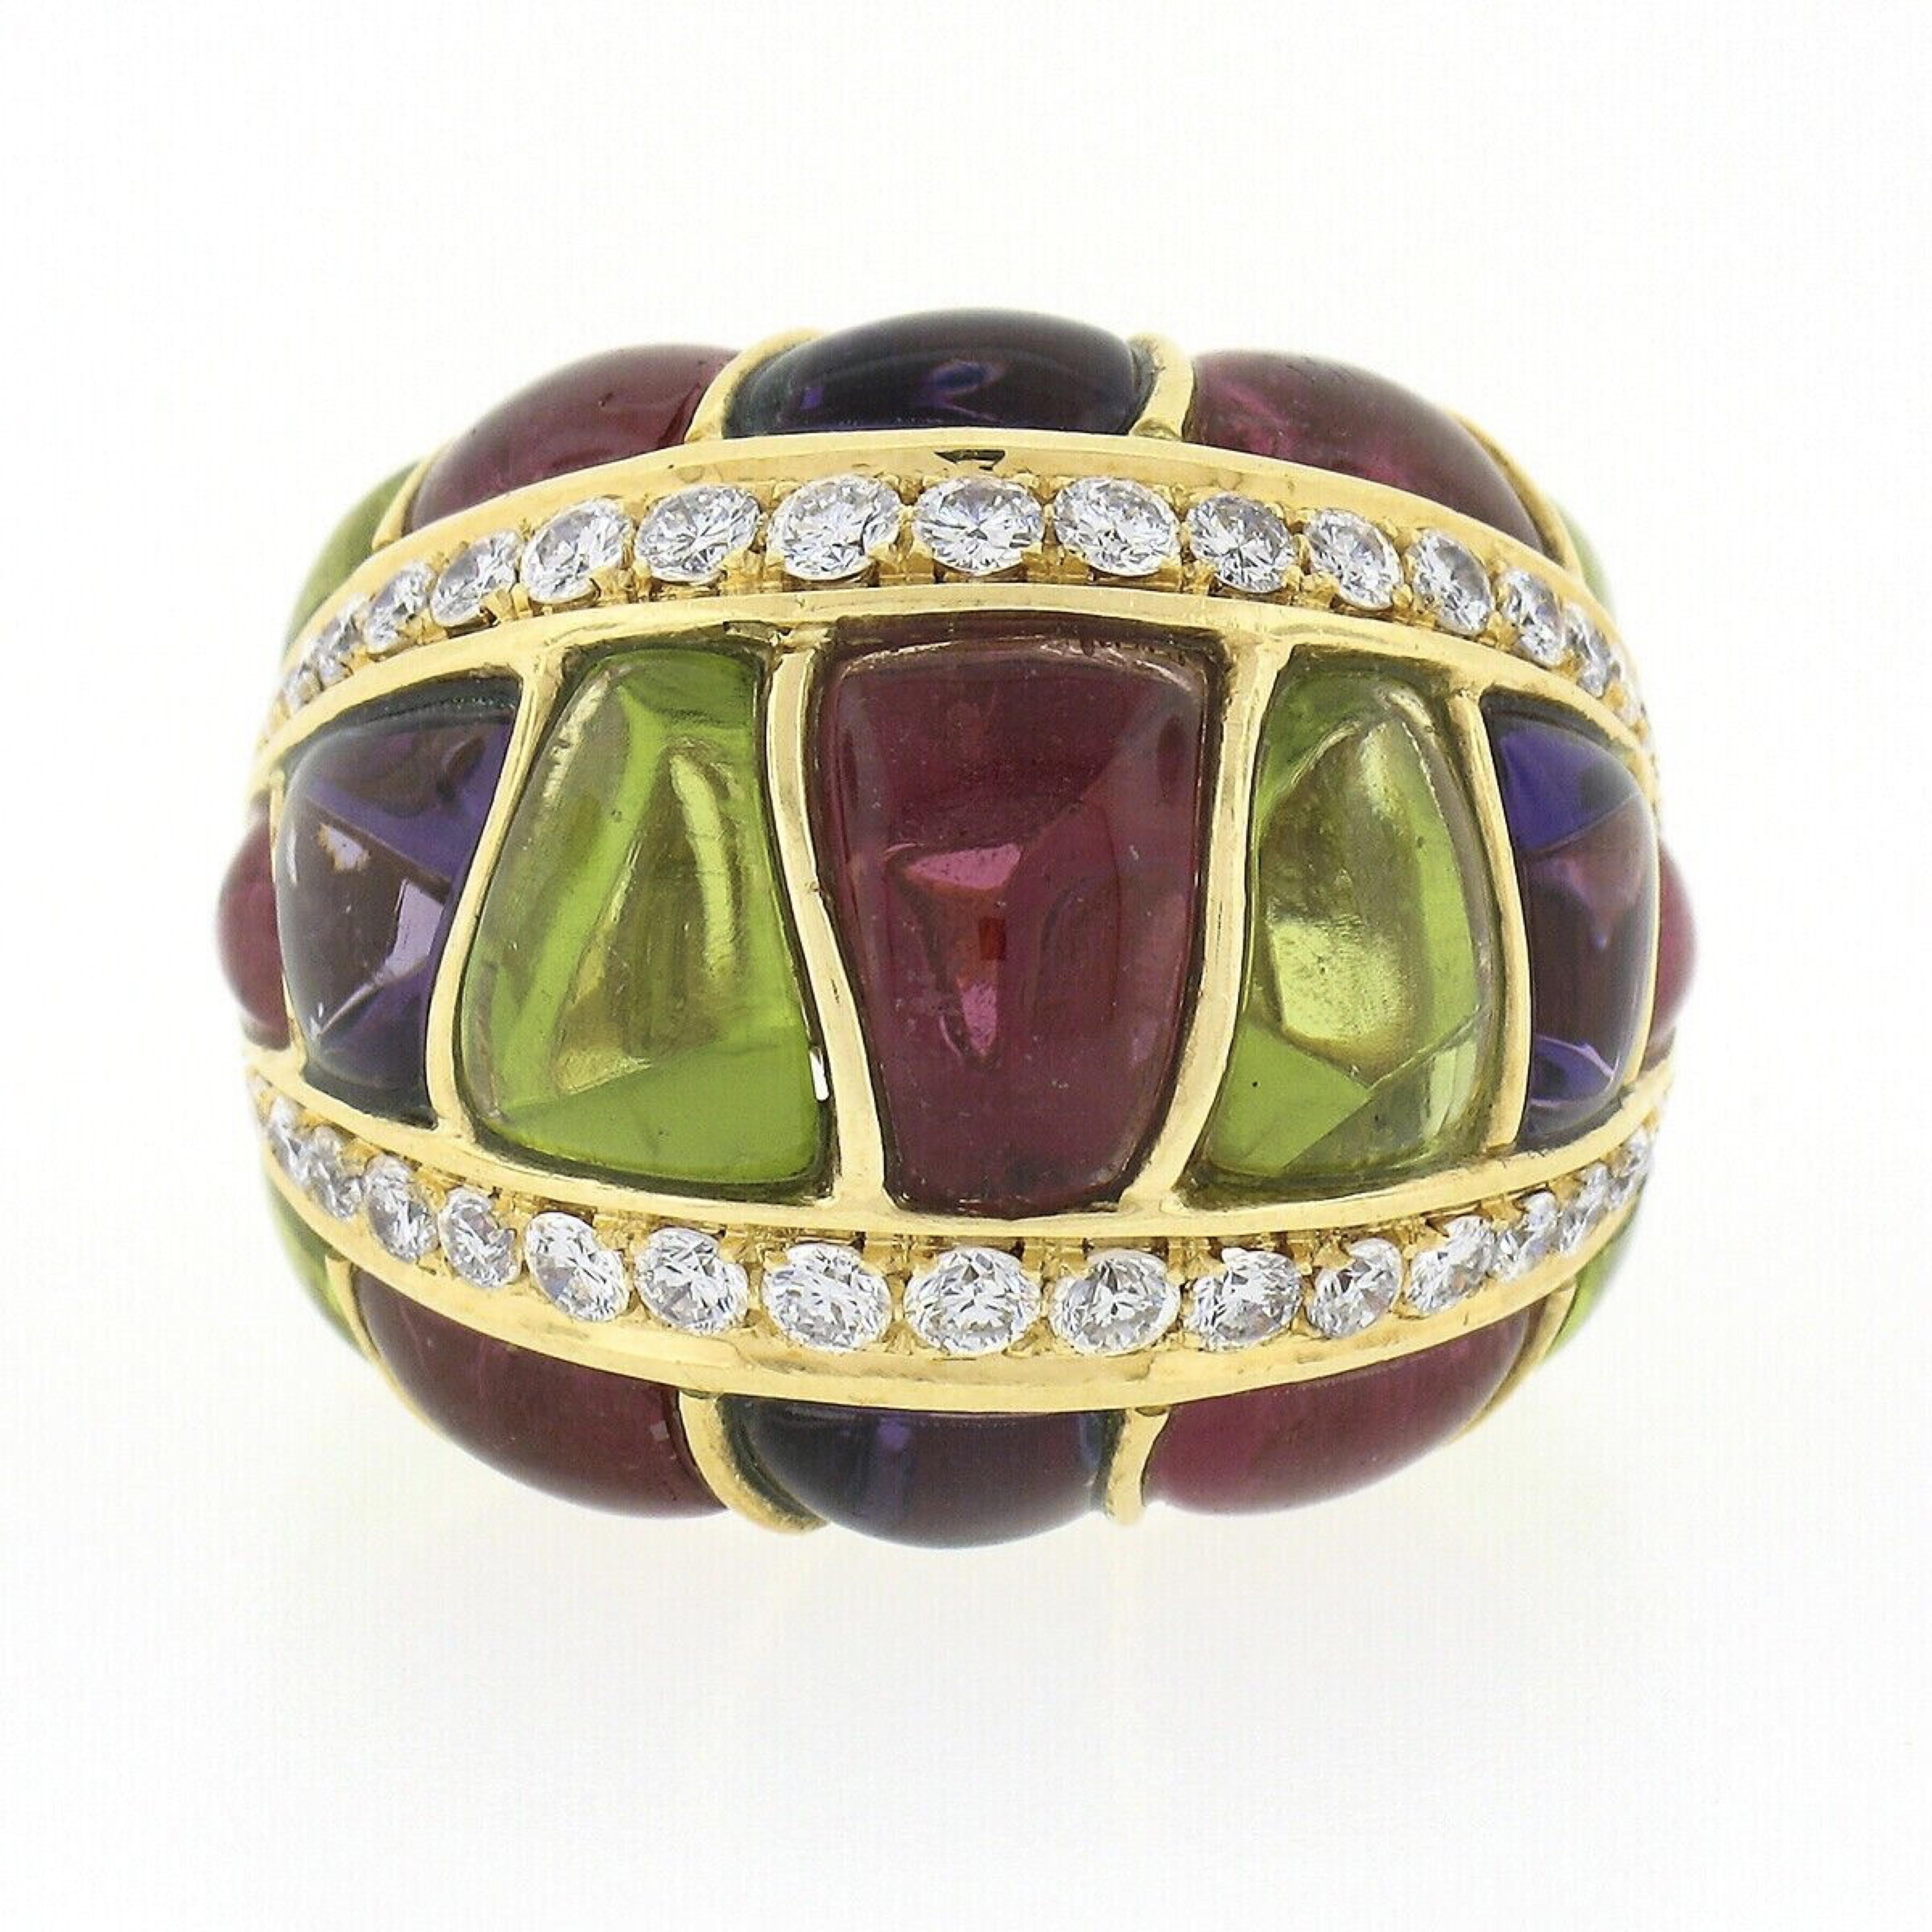 Roberto Casarin 18K Gold Amethyst Peridot Tourmaline & Diamond Domed Bombe Ring In Good Condition For Sale In Montclair, NJ